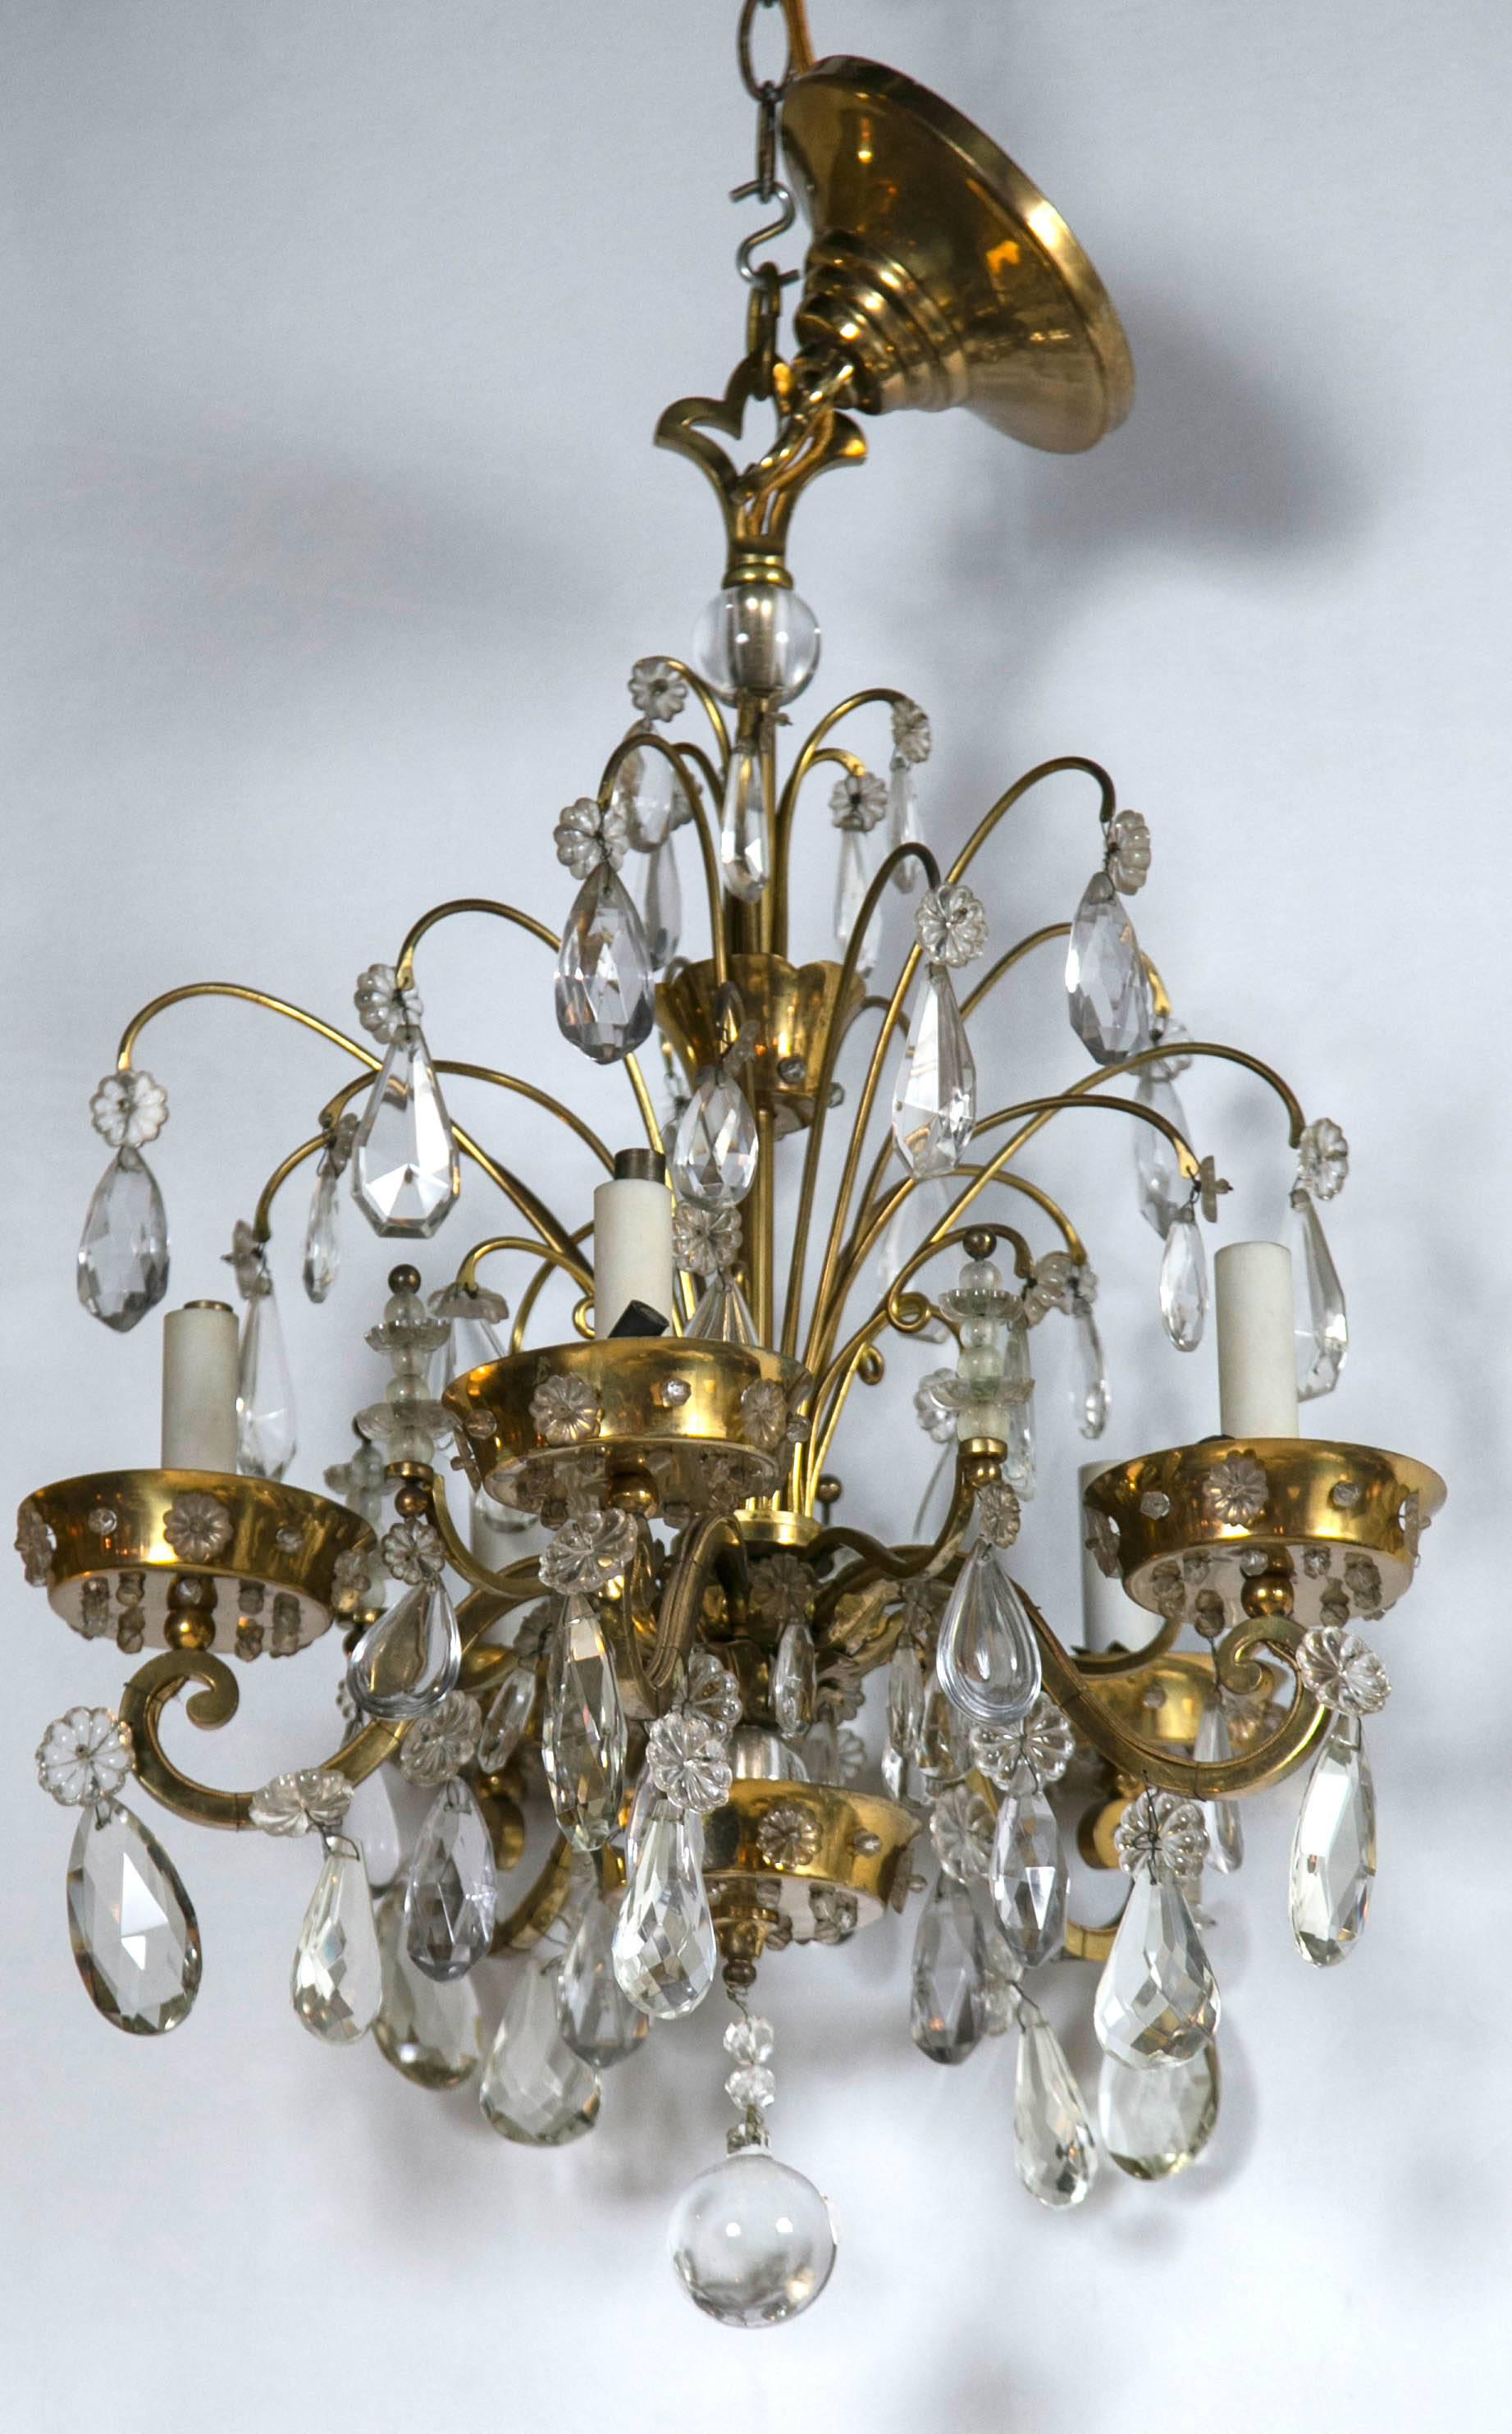 A fine bronze and crystal chandelier by Maison Jansen. The five-arm bronze piece with floral and scroll design having crystals cut into the candle like trays. Recently re-wired and cleaned. This chandelier is sure to not only light up any area its